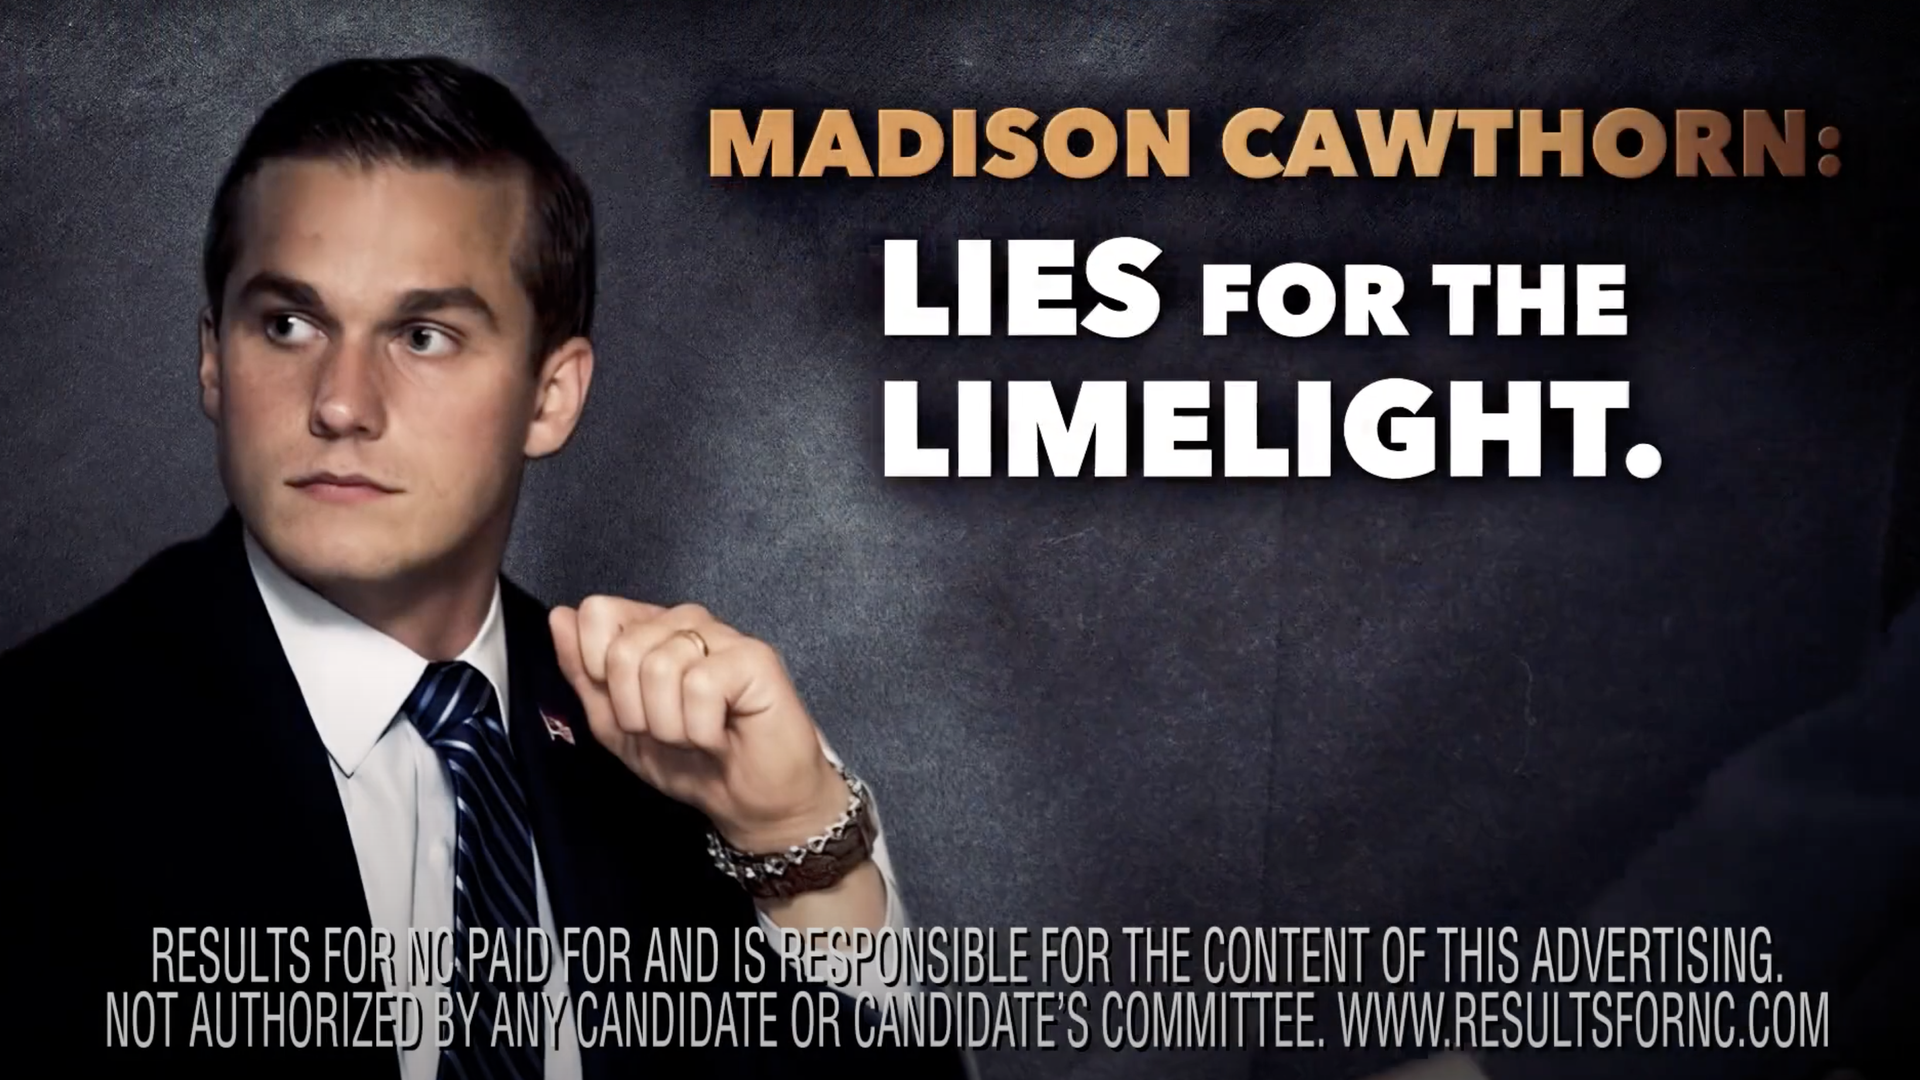 A screenshot of super pac Results for NC's ad hitting Madison Cawthorn's "lies"